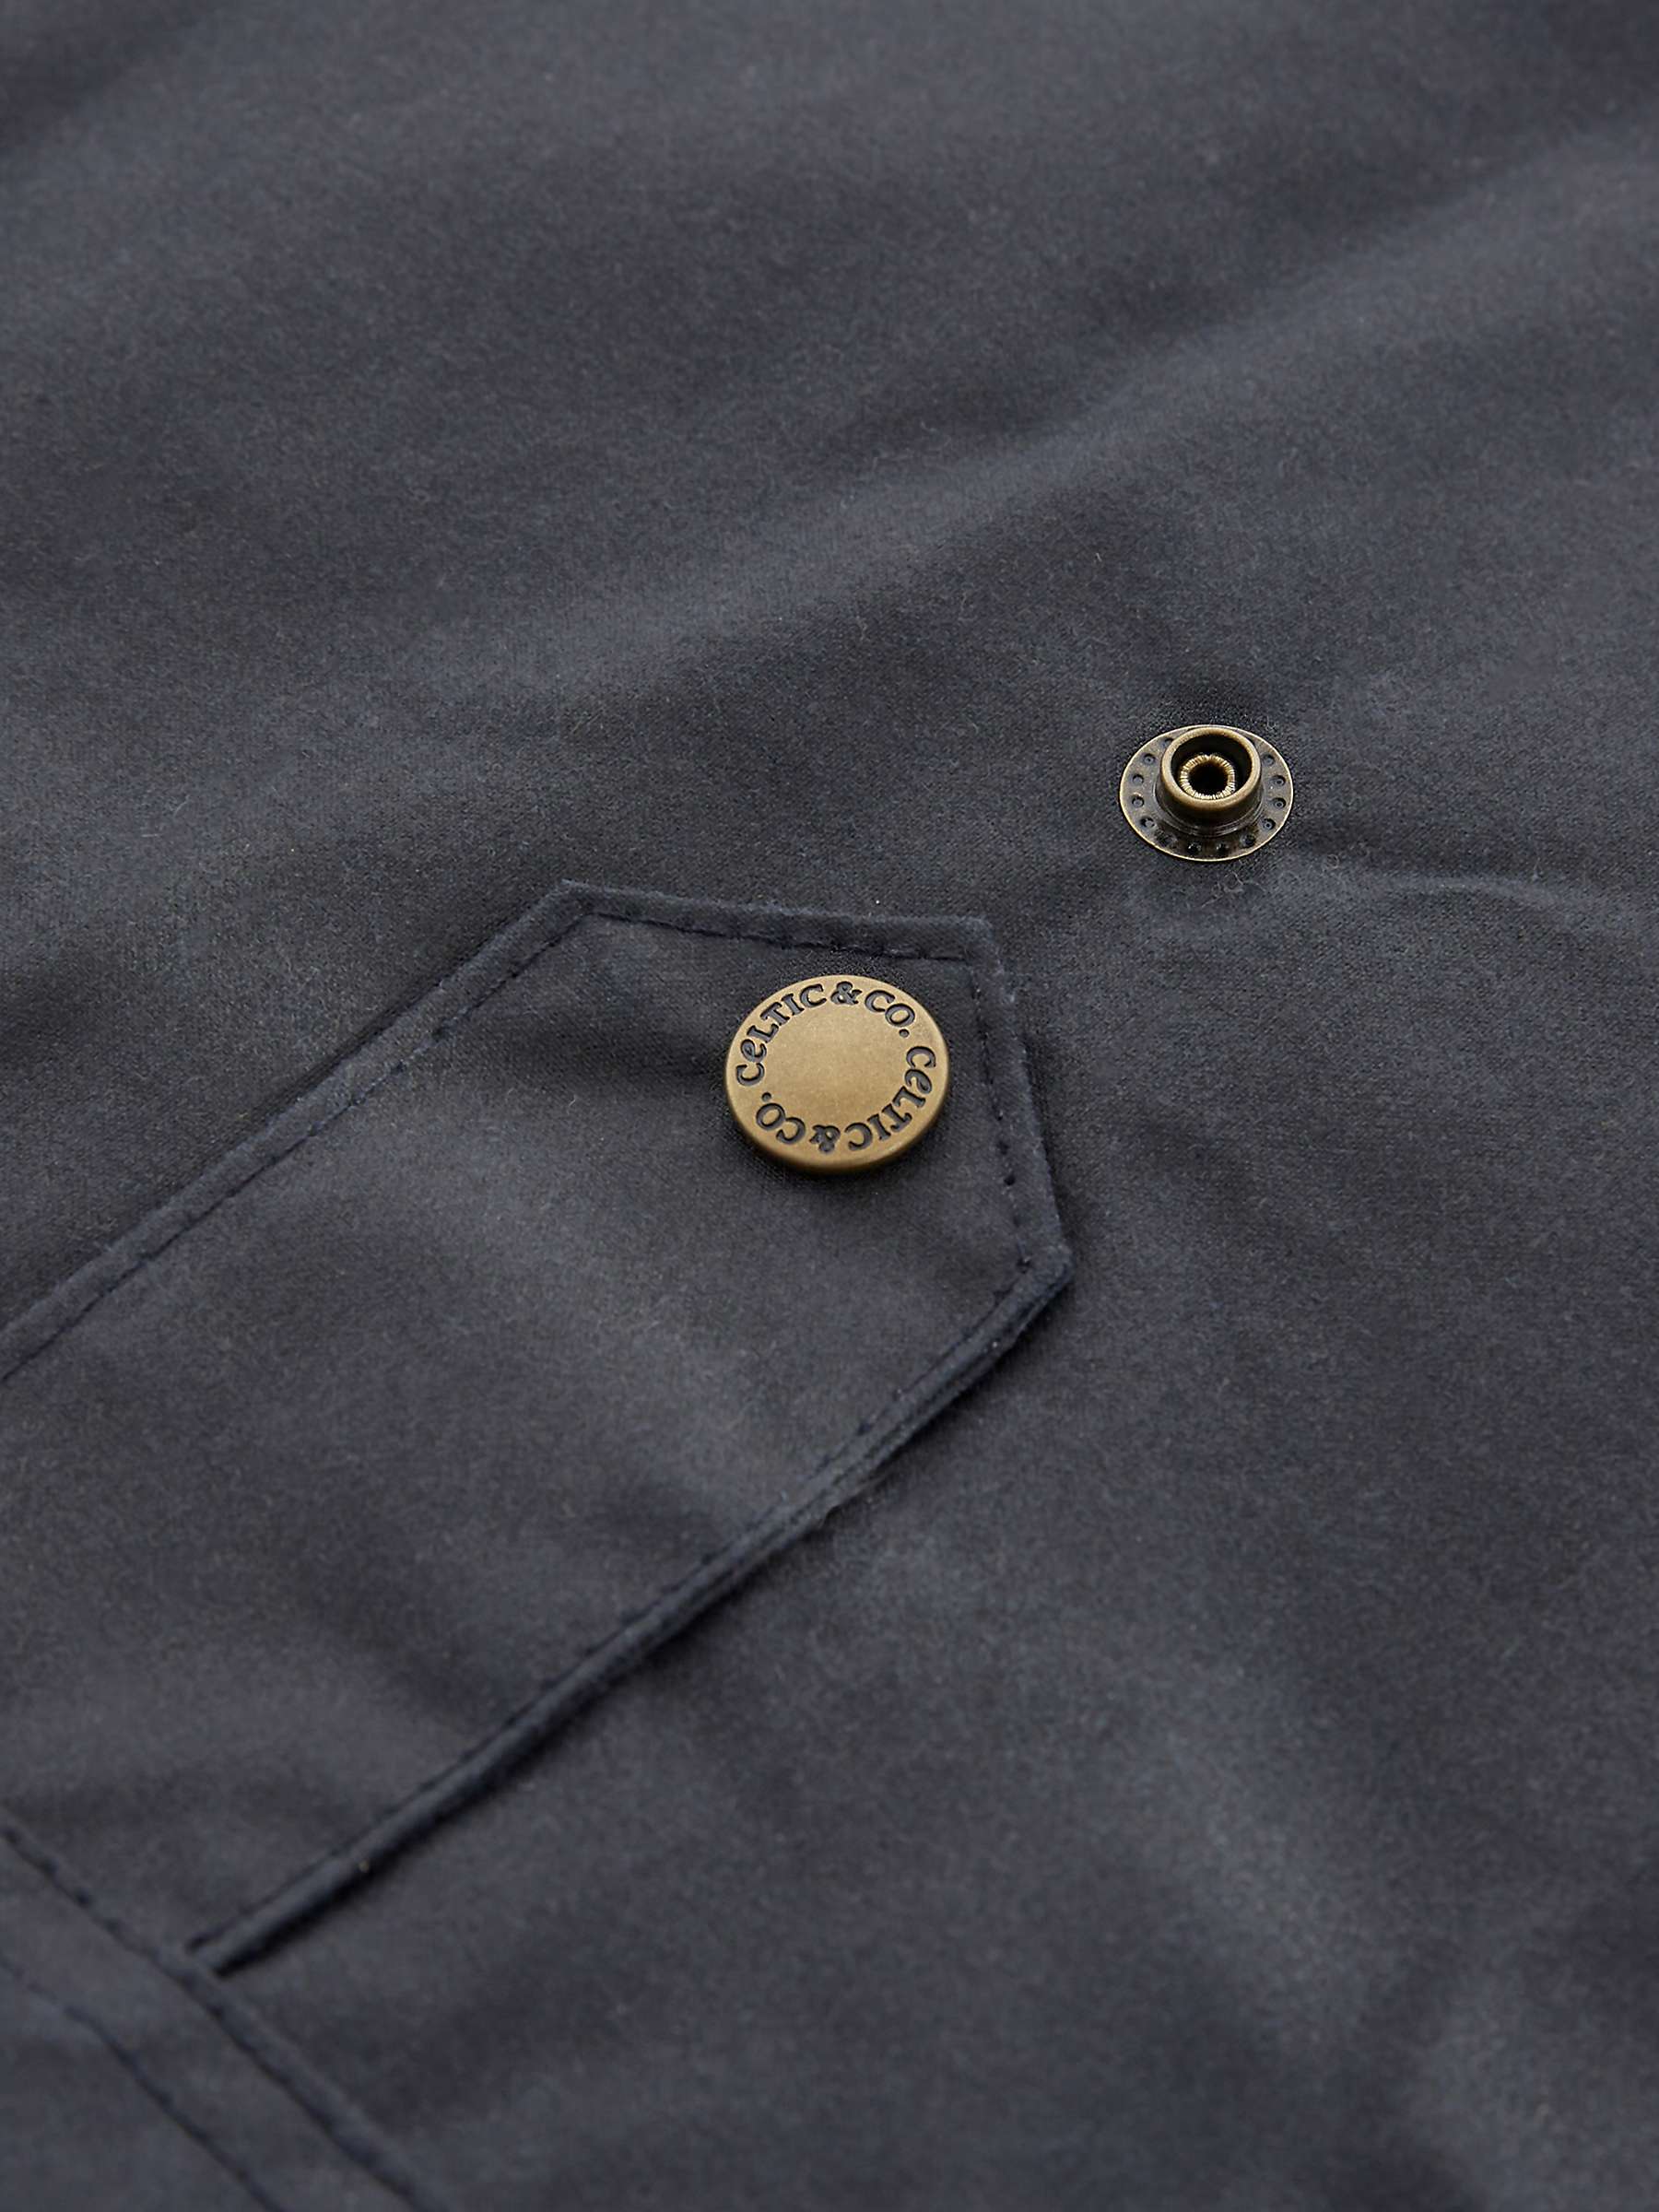 Buy Celtic & Co. Waxed Cotton Jacket, Dark Navy Online at johnlewis.com